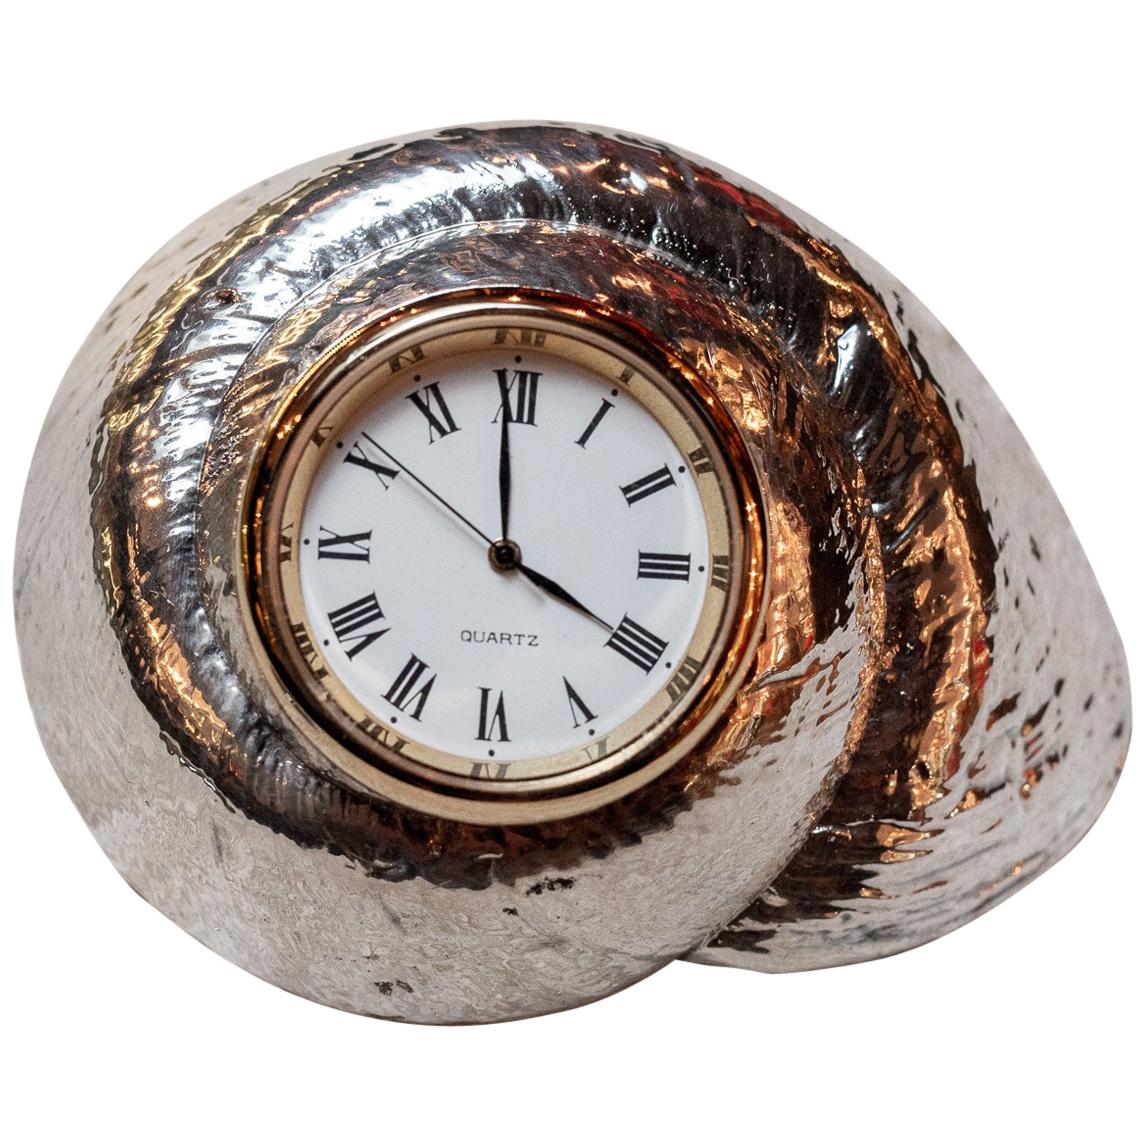 Silvered Rosy Top Sea Shell with Clock by Creel and Gow